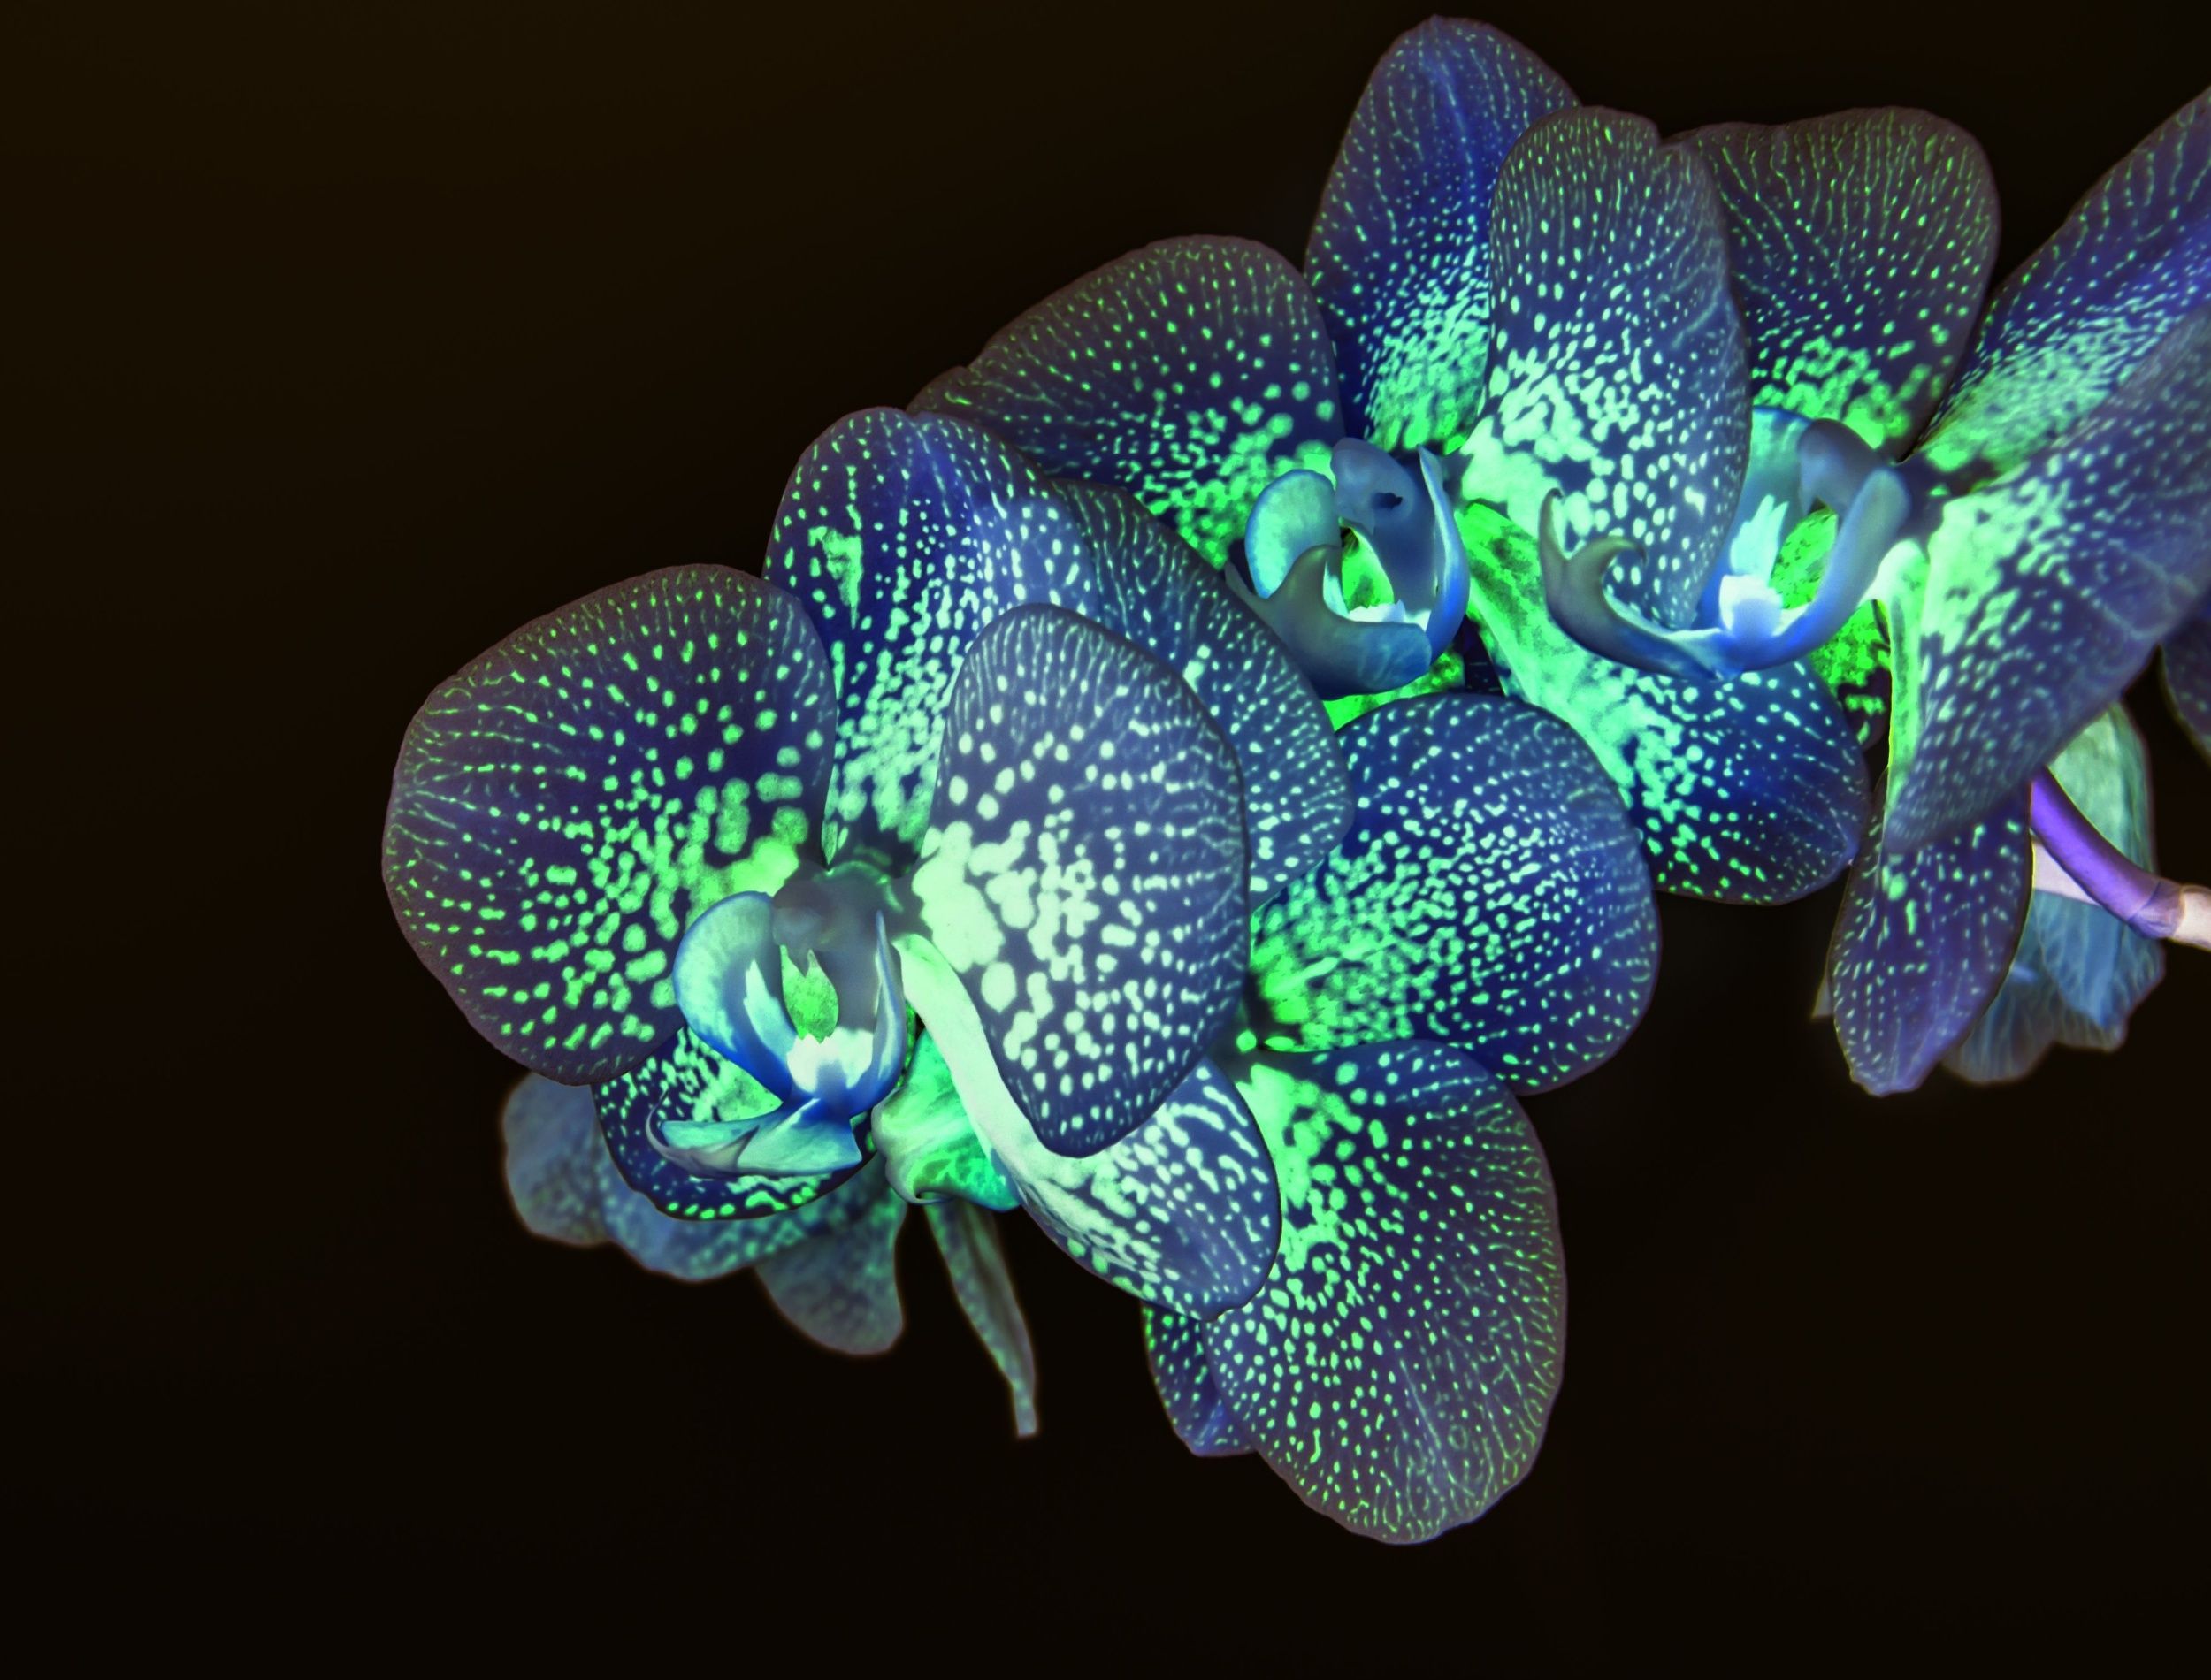 Bioluminescent orchids, glowing in the dark